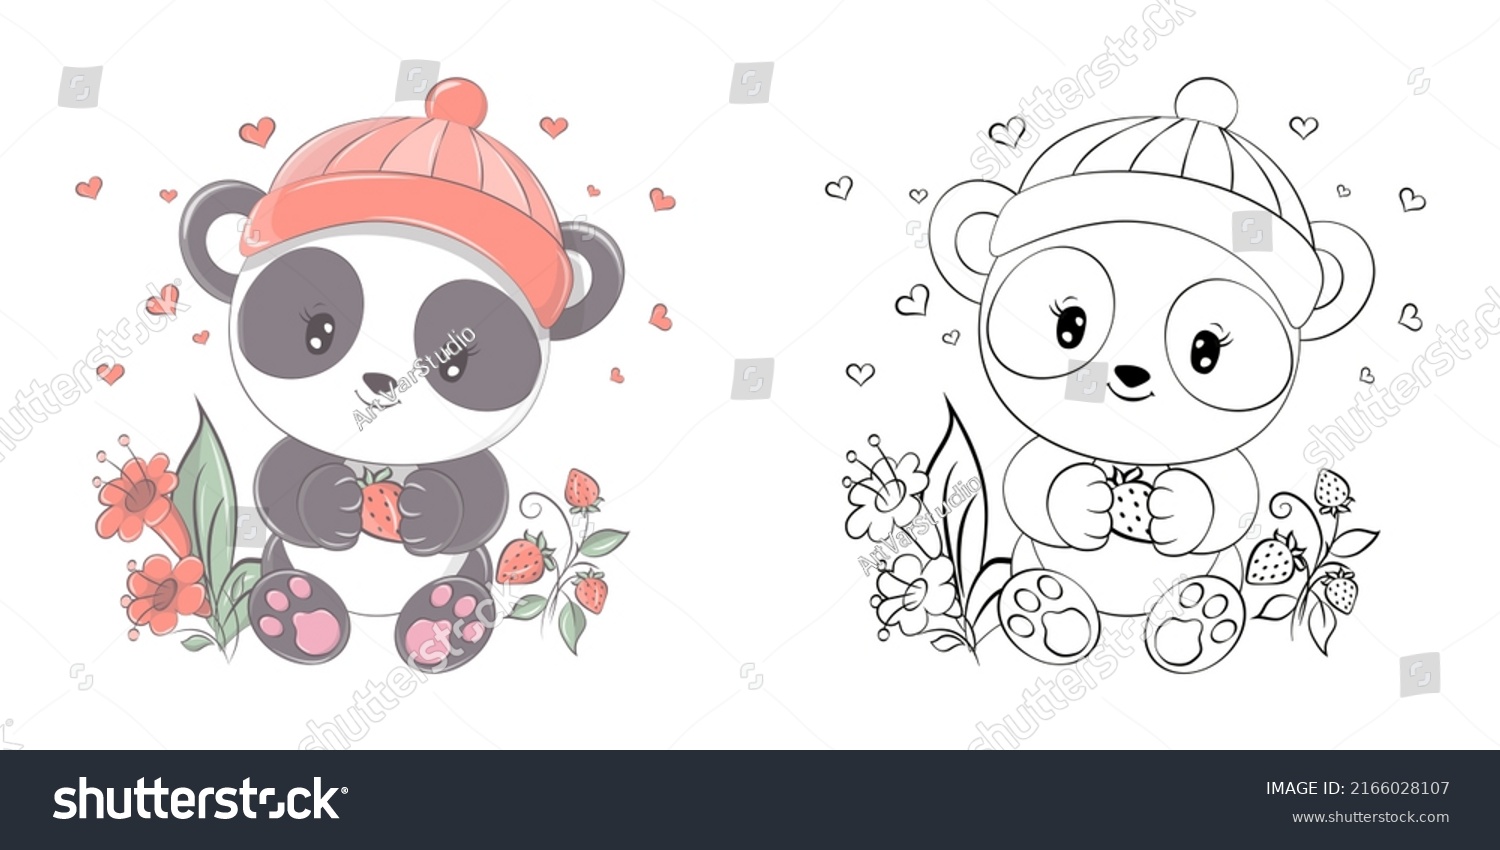 SVG of Clipart Panda Multicolored and Black and White. Cute Clip Art Panda with Strawberry. Vector Illustration of an Animal for Stickers, Baby Shower, Coloring Pages, Prints for Clothes svg